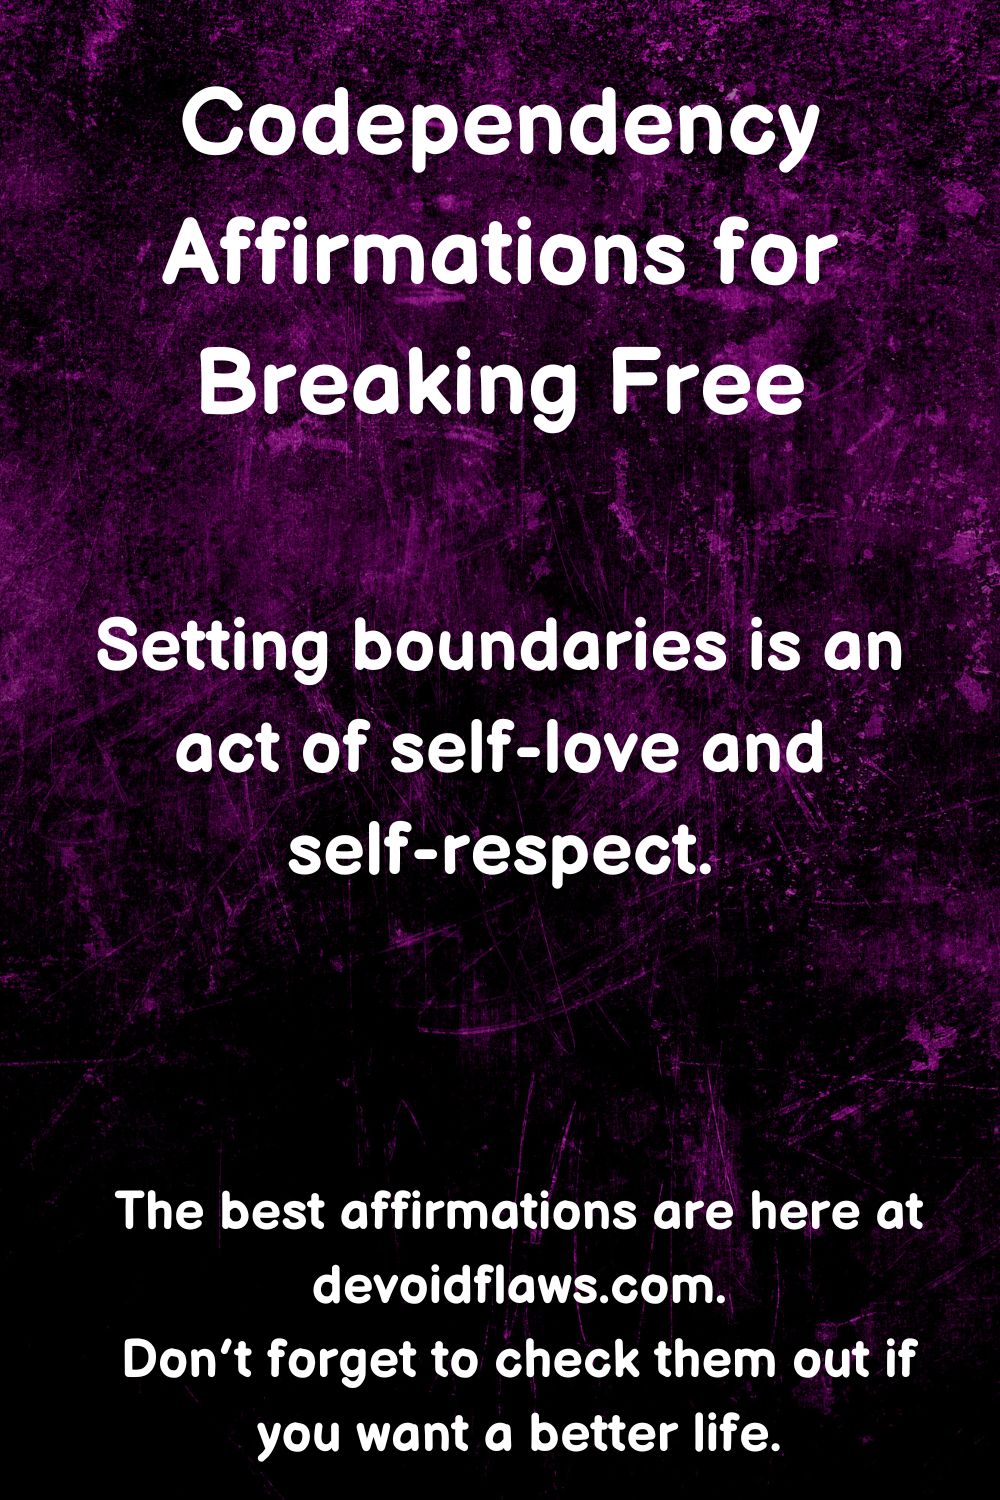 codependency affirmation for breaking free